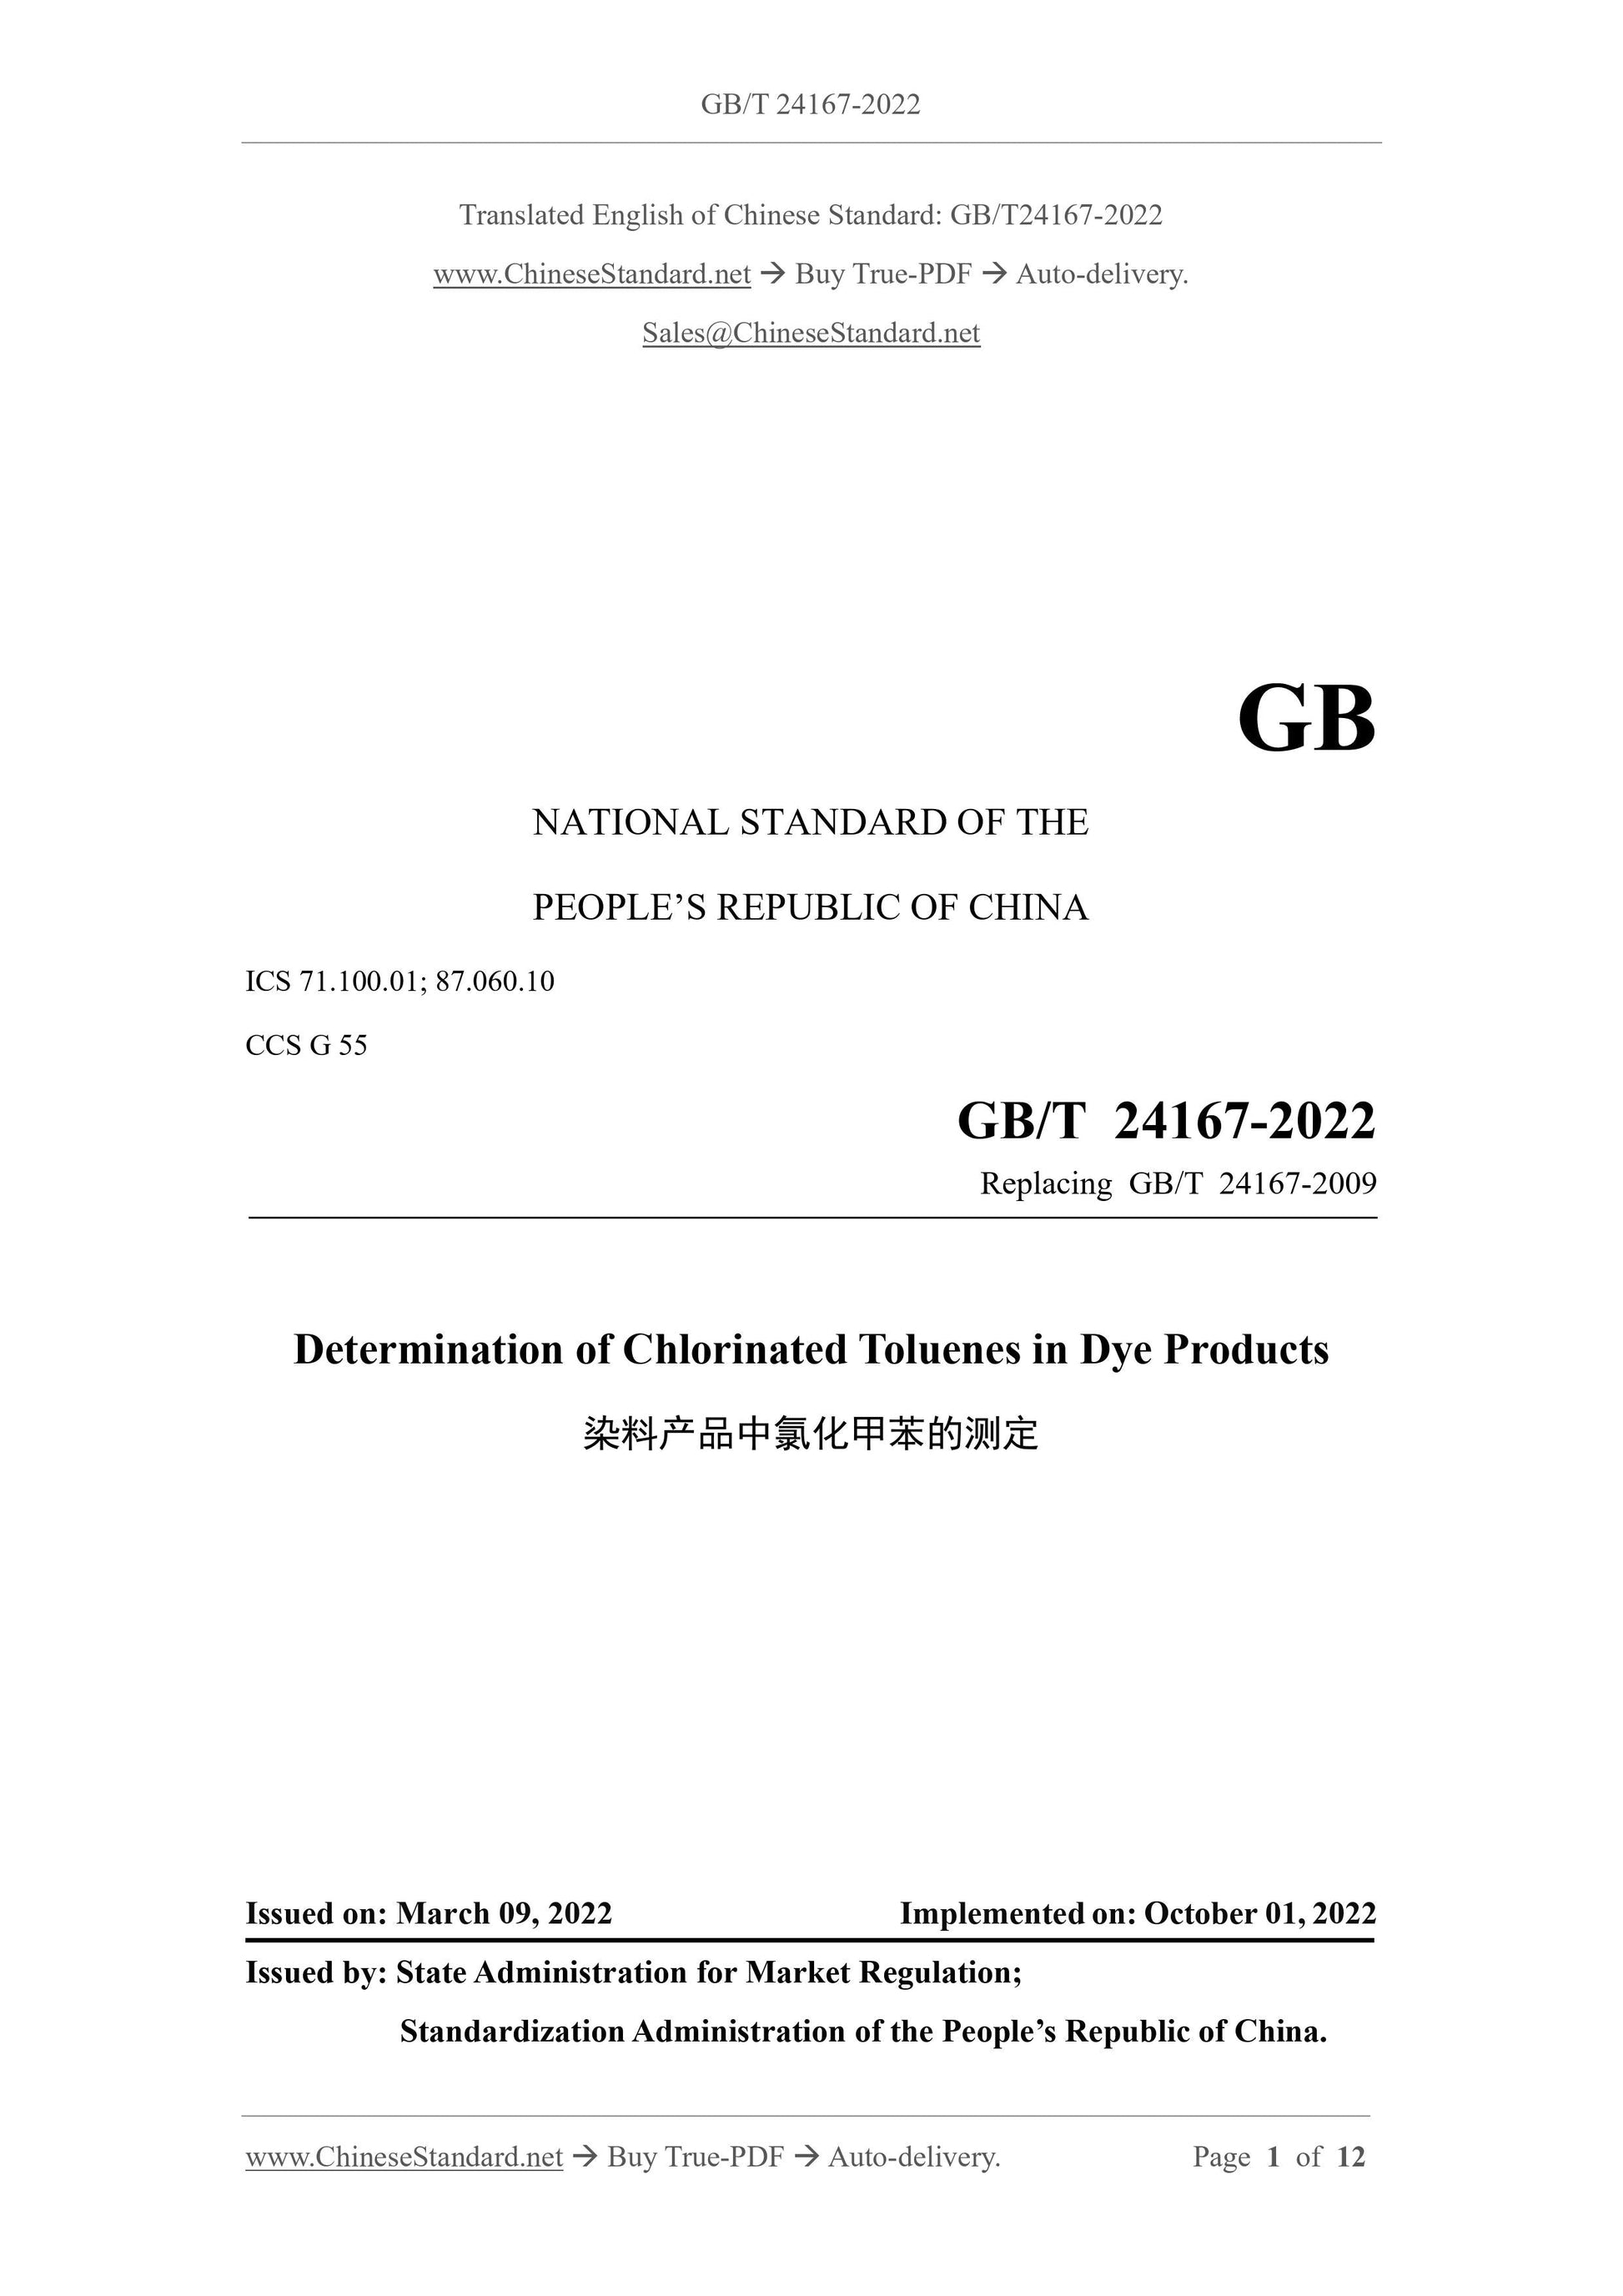 GB/T 24167-2022 Page 1